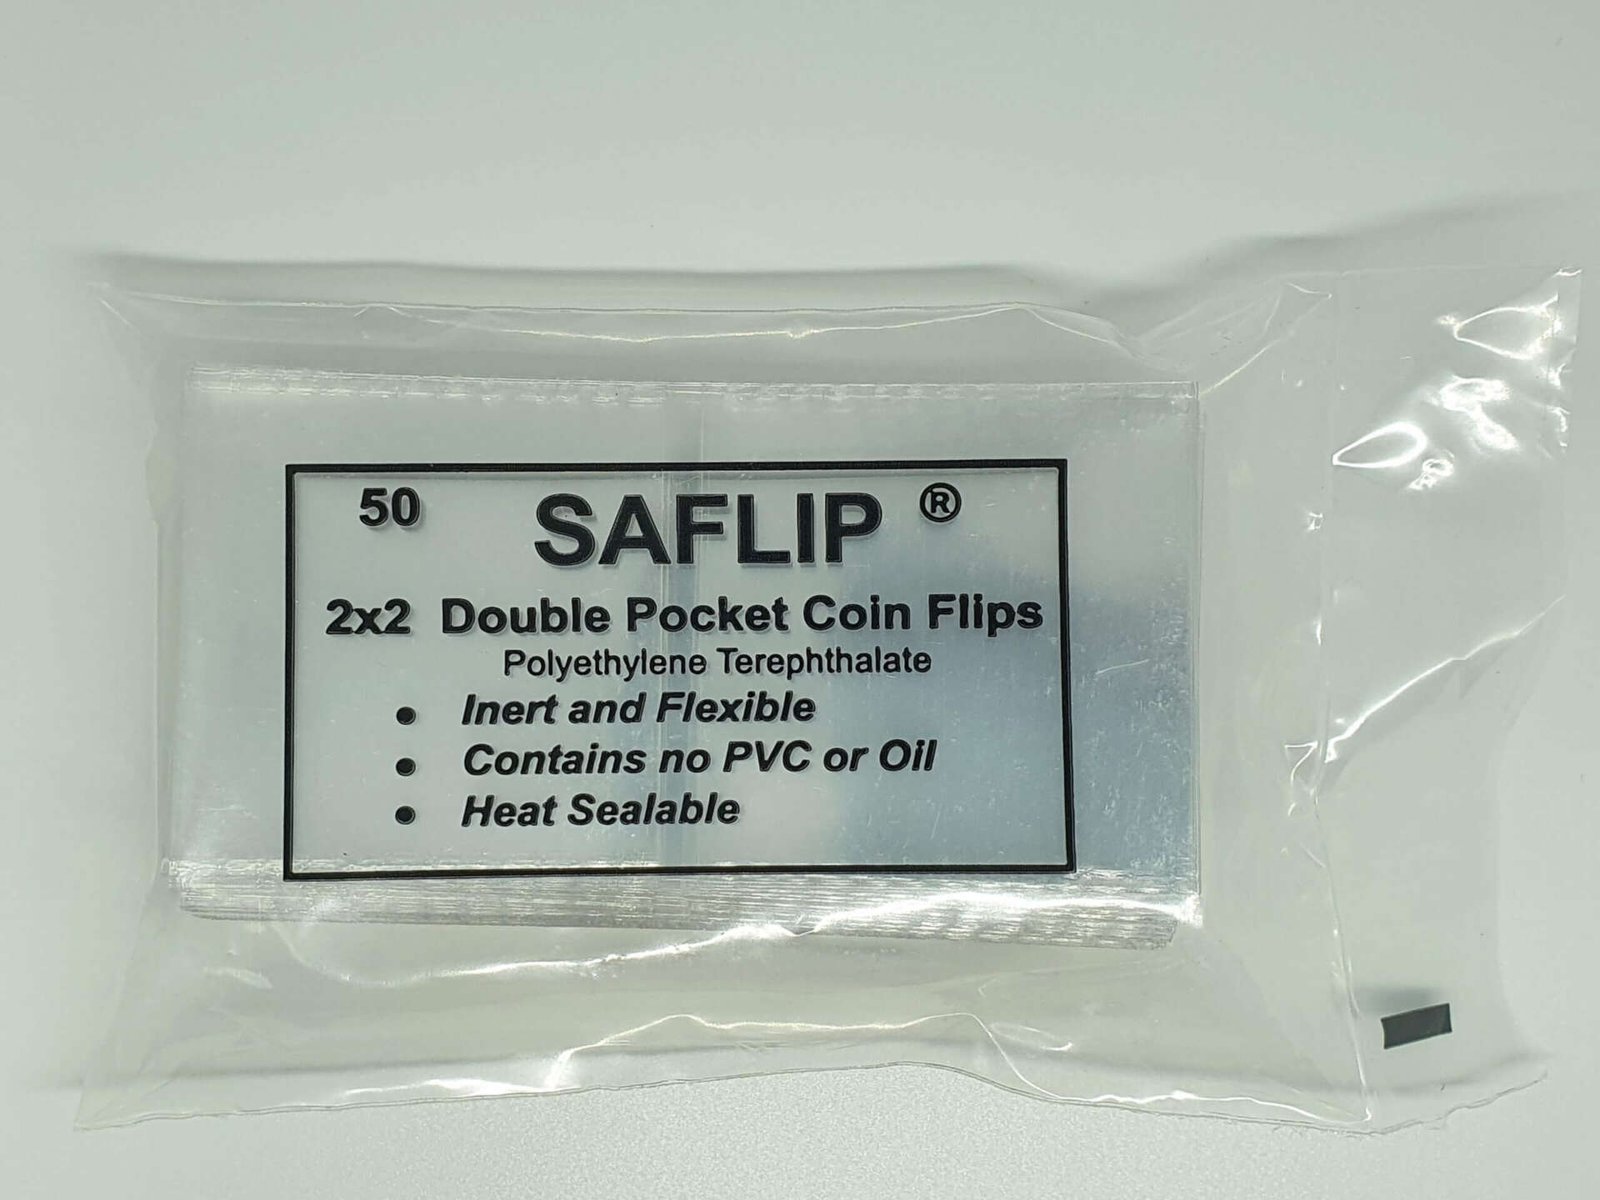 Double Pocket Plastic Coin Holders USA made 25 Pack 2x2 Coin Flips PVC-free 